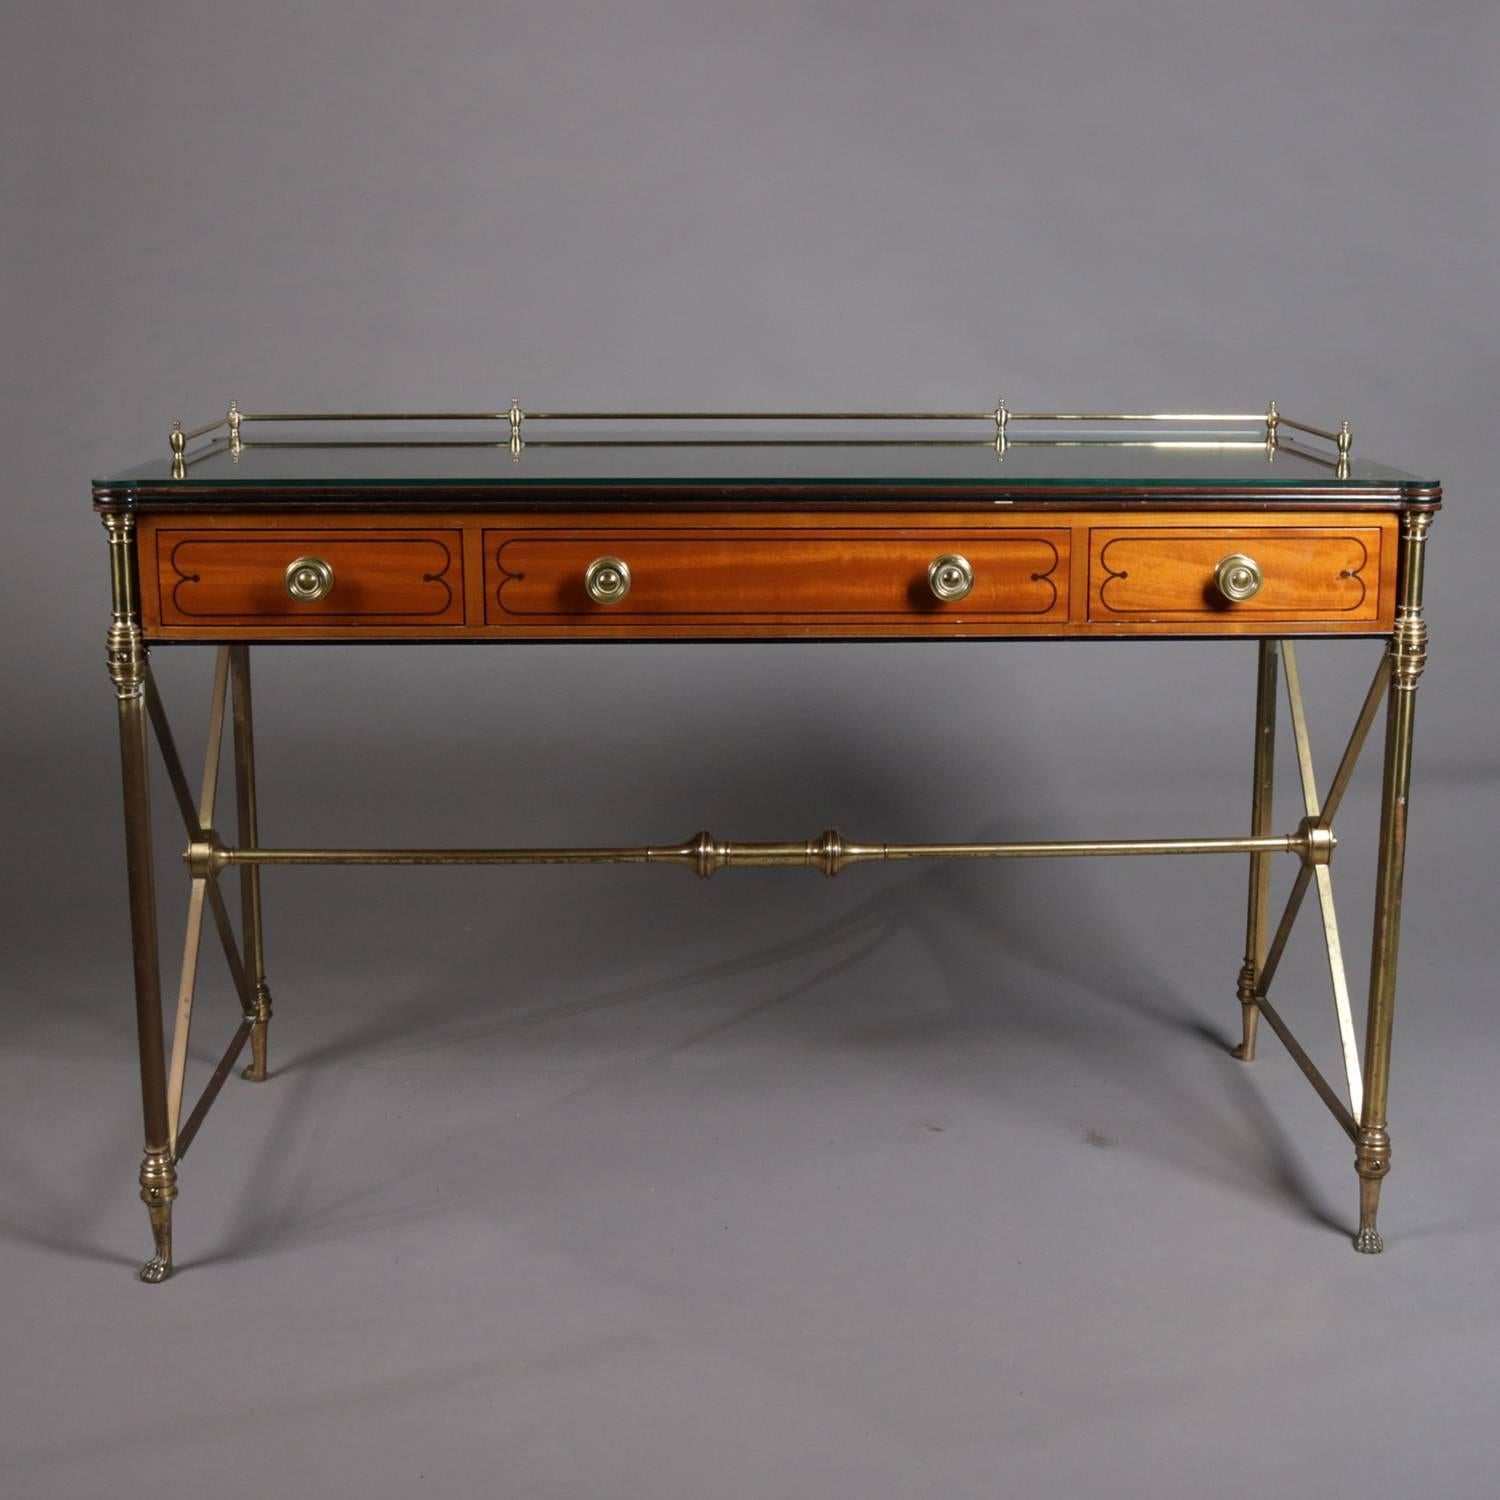 Neoclassical writing desk by Kittinger features three-drawer satinwood case with shaped top having brass gallery and glass covering, seated in brass frame with X-form support with floral medallion and between column-form legs terminating in paw